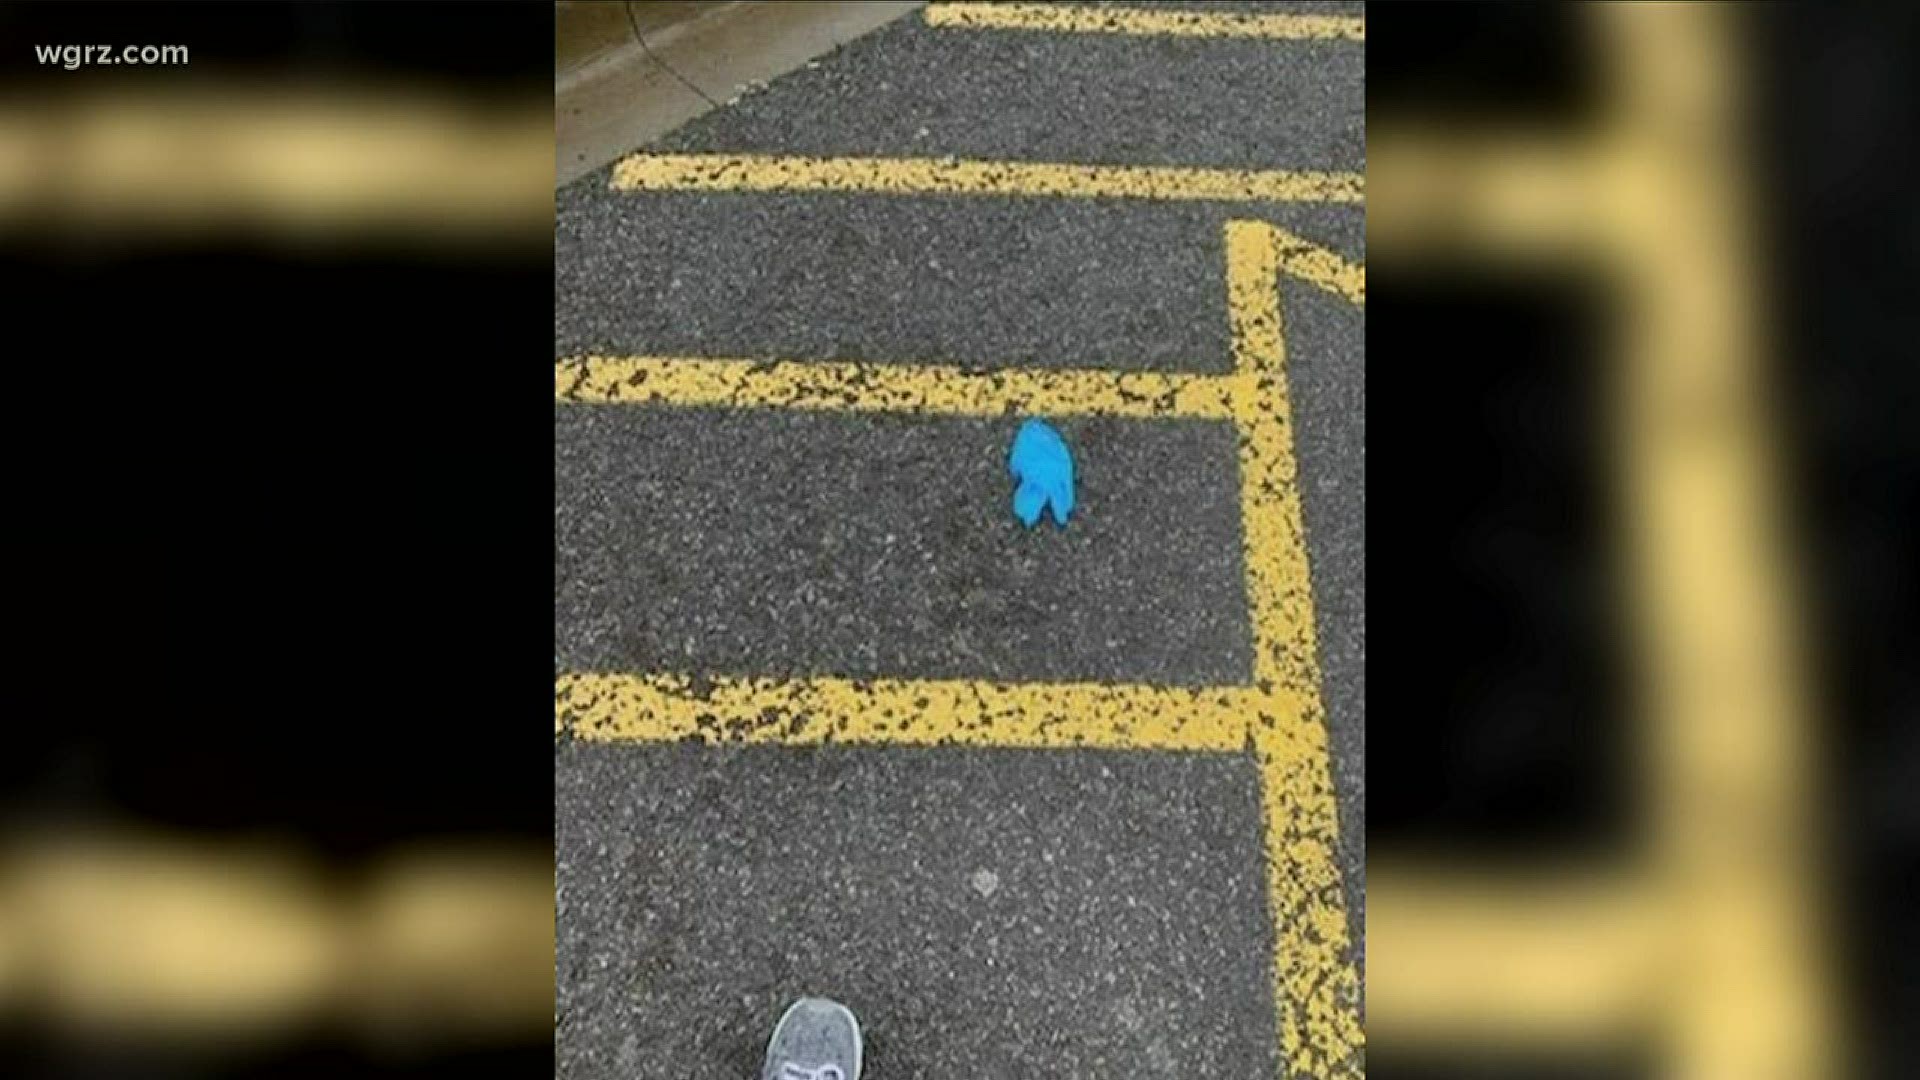 she sent us these photos of a Walmart parking lot.